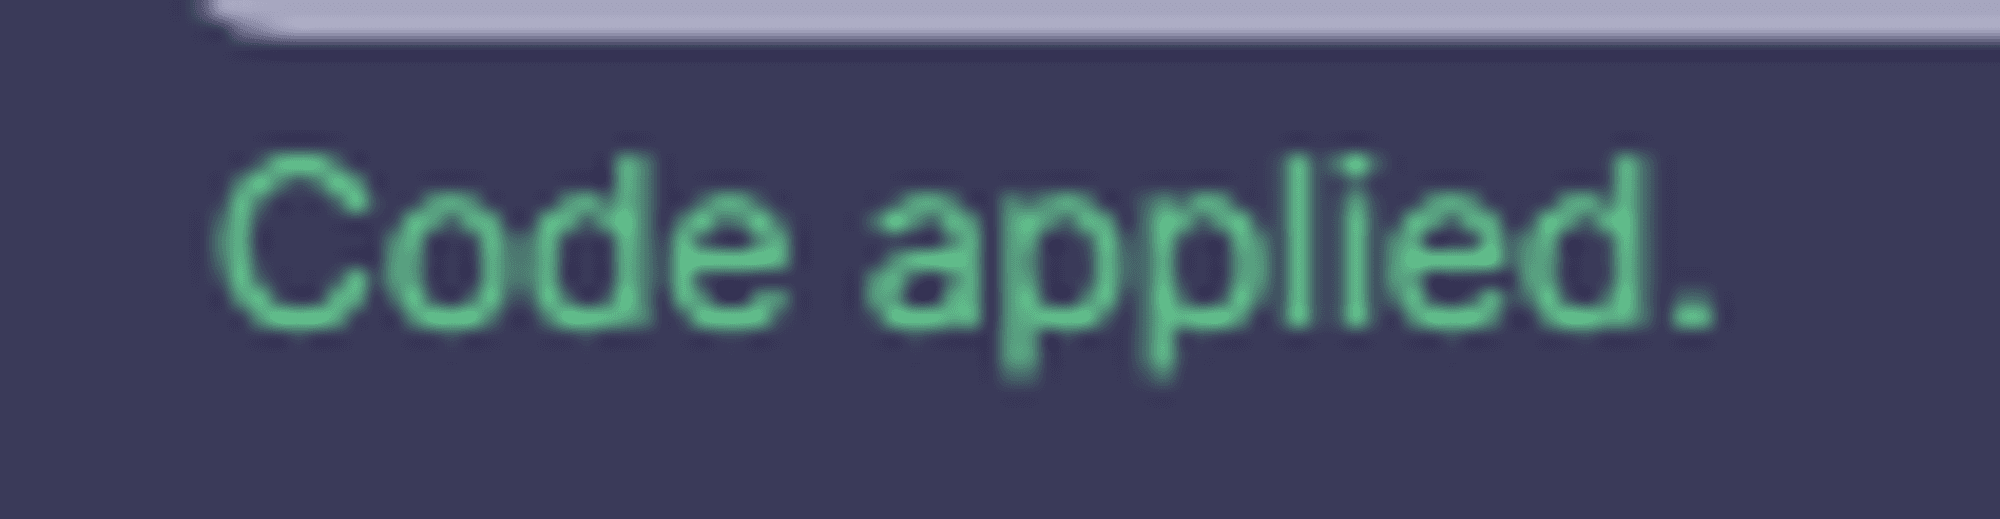 code_applied.png